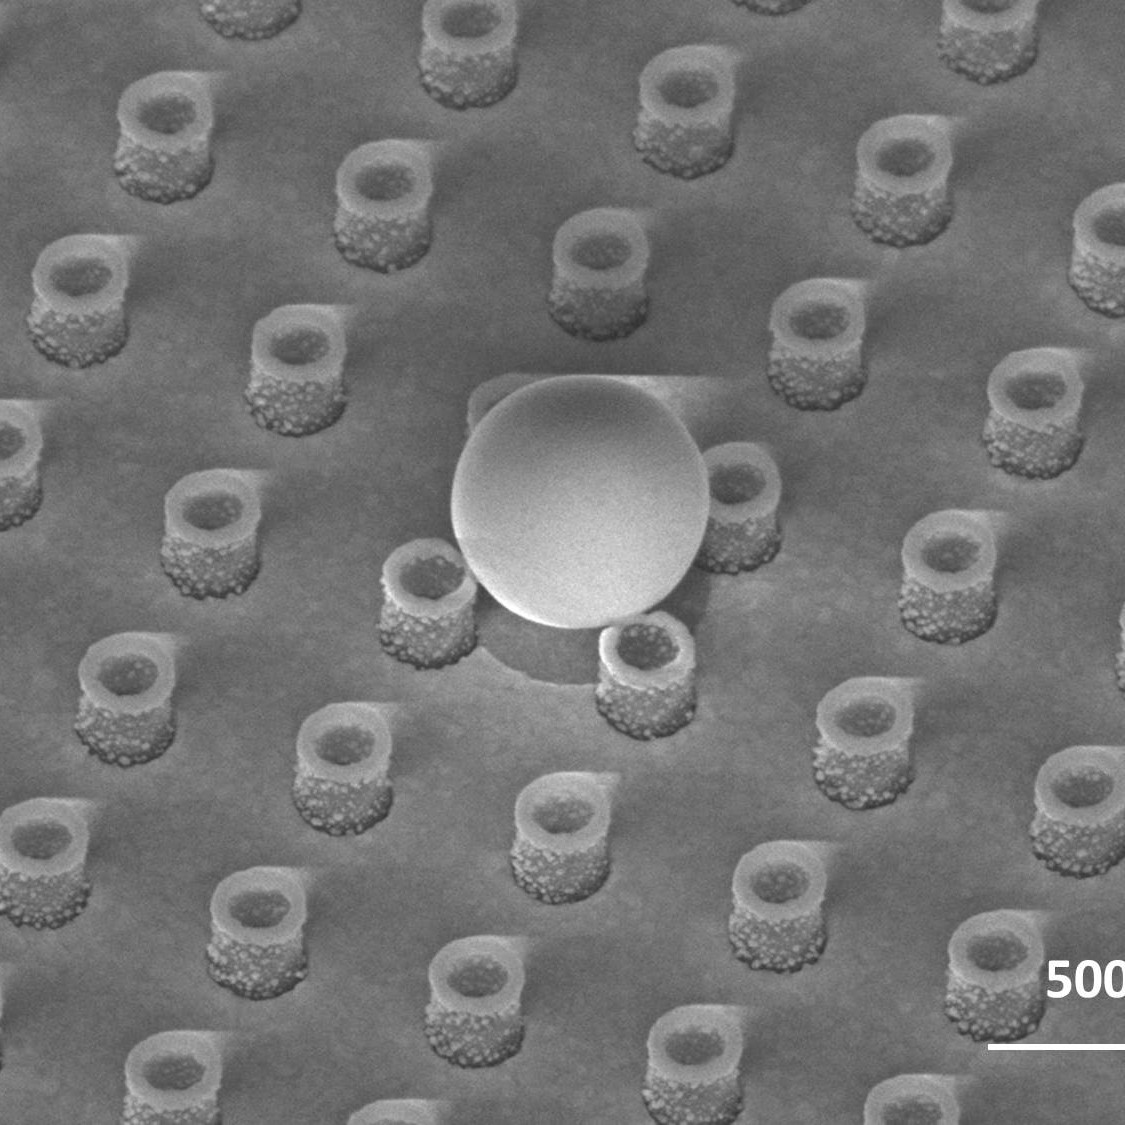 SEM image showing a single gold ball in a nanoring array